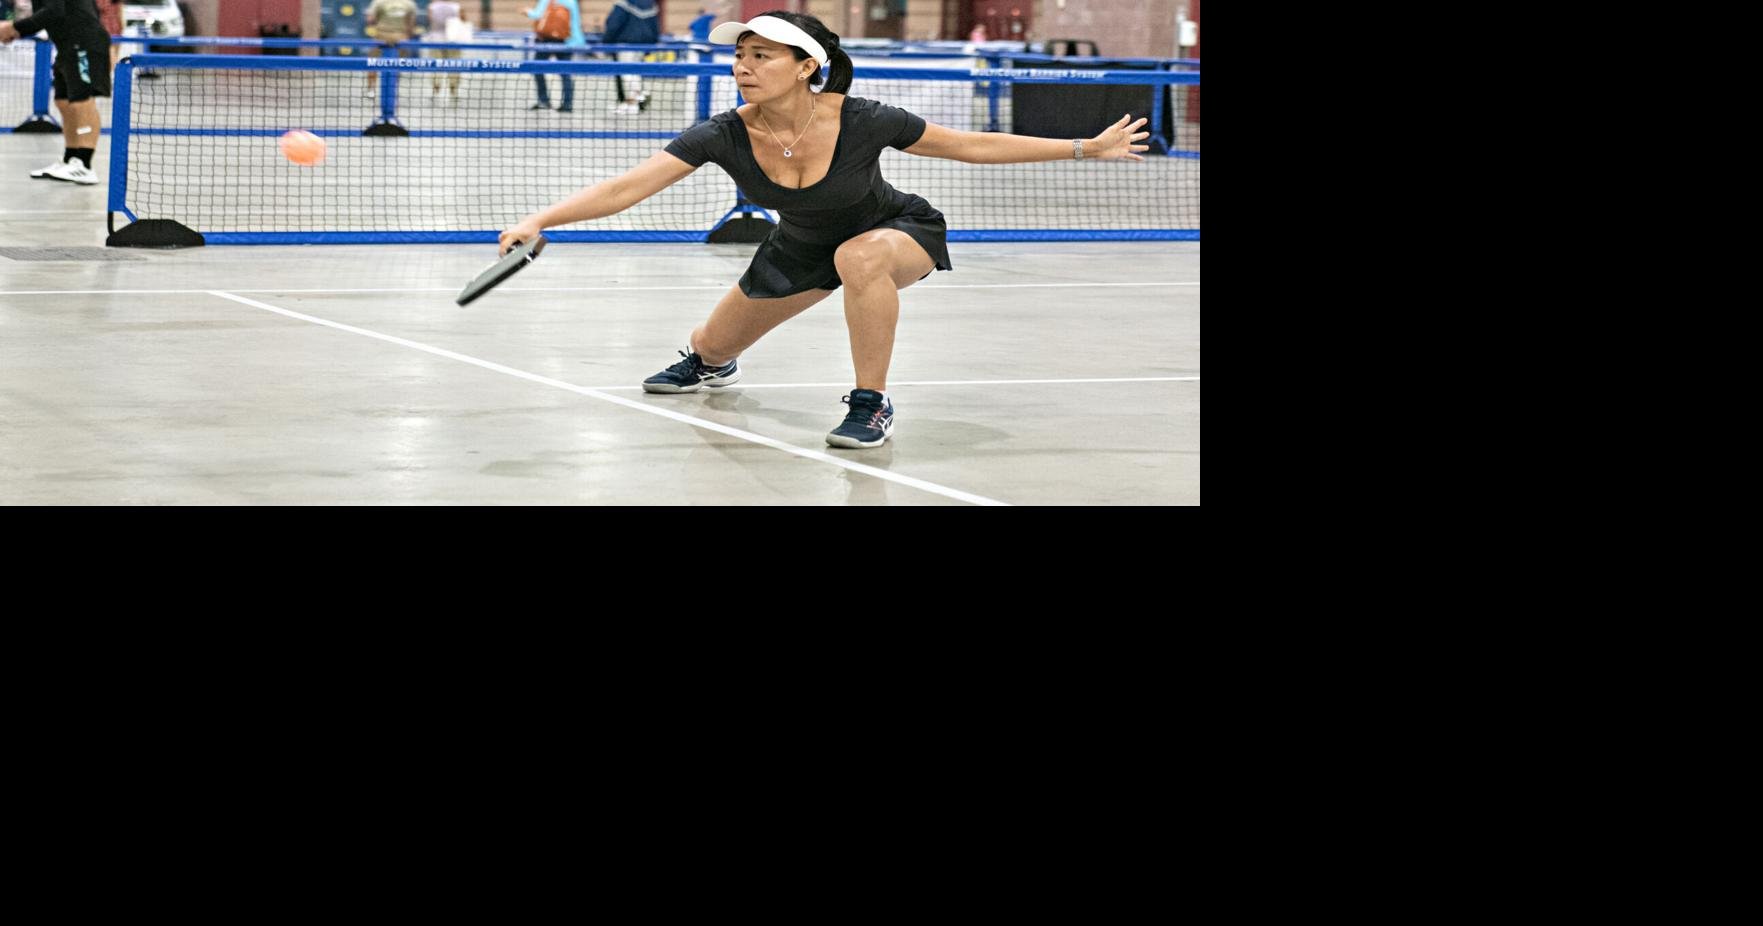 Inaugural pickleball tournament off to great start in Atlantic City